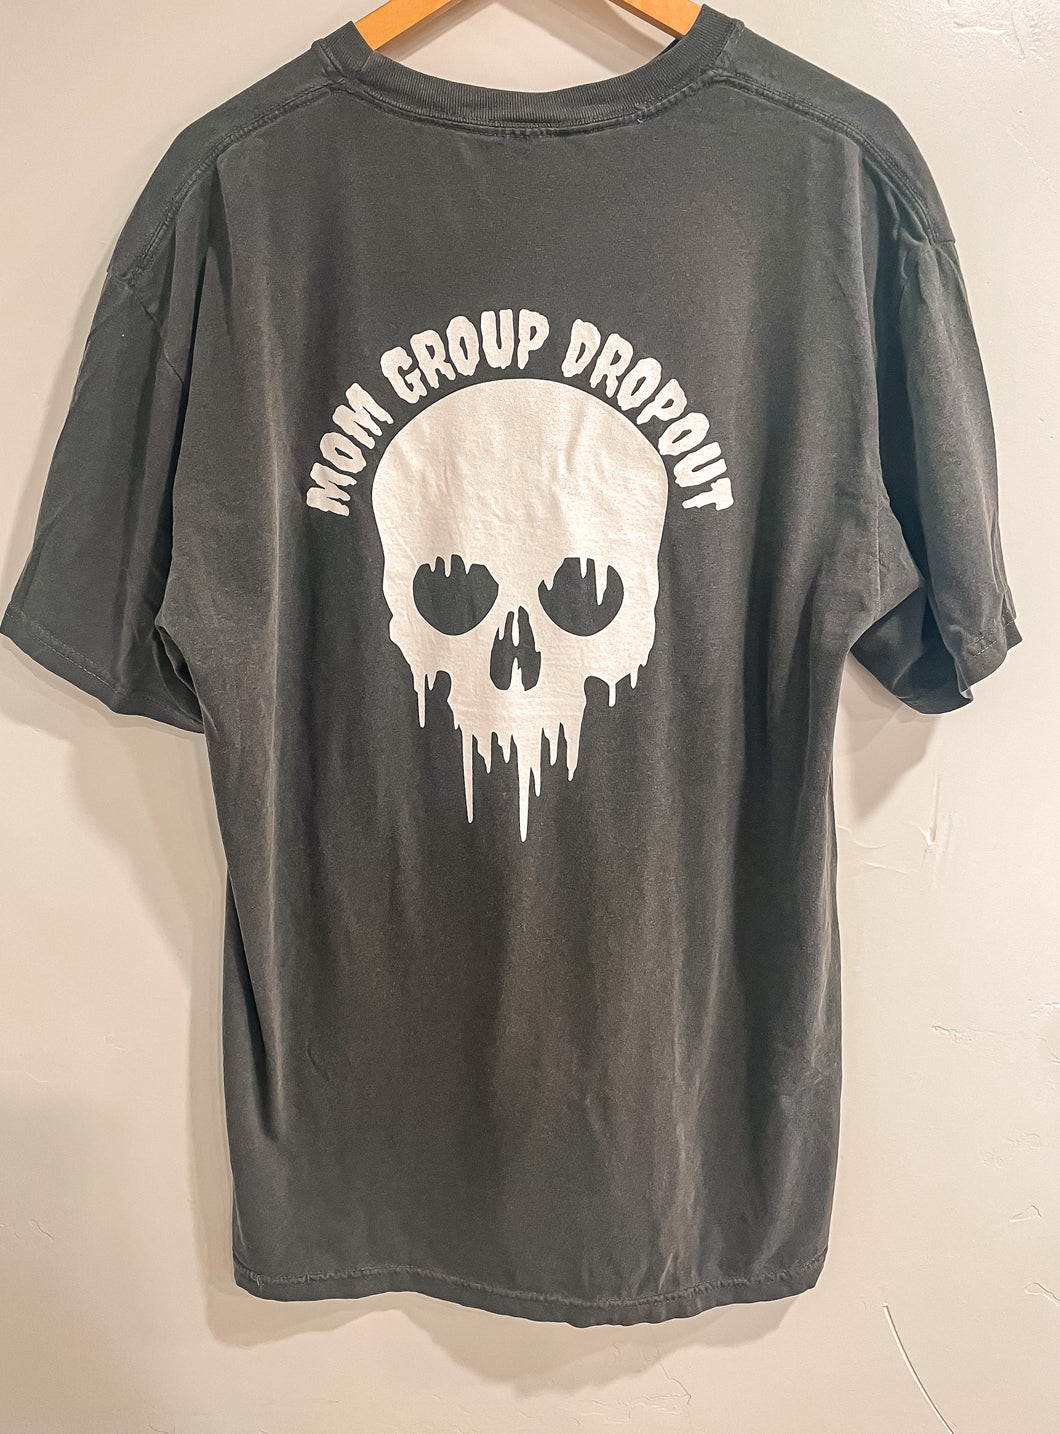 Mom group dropout tee